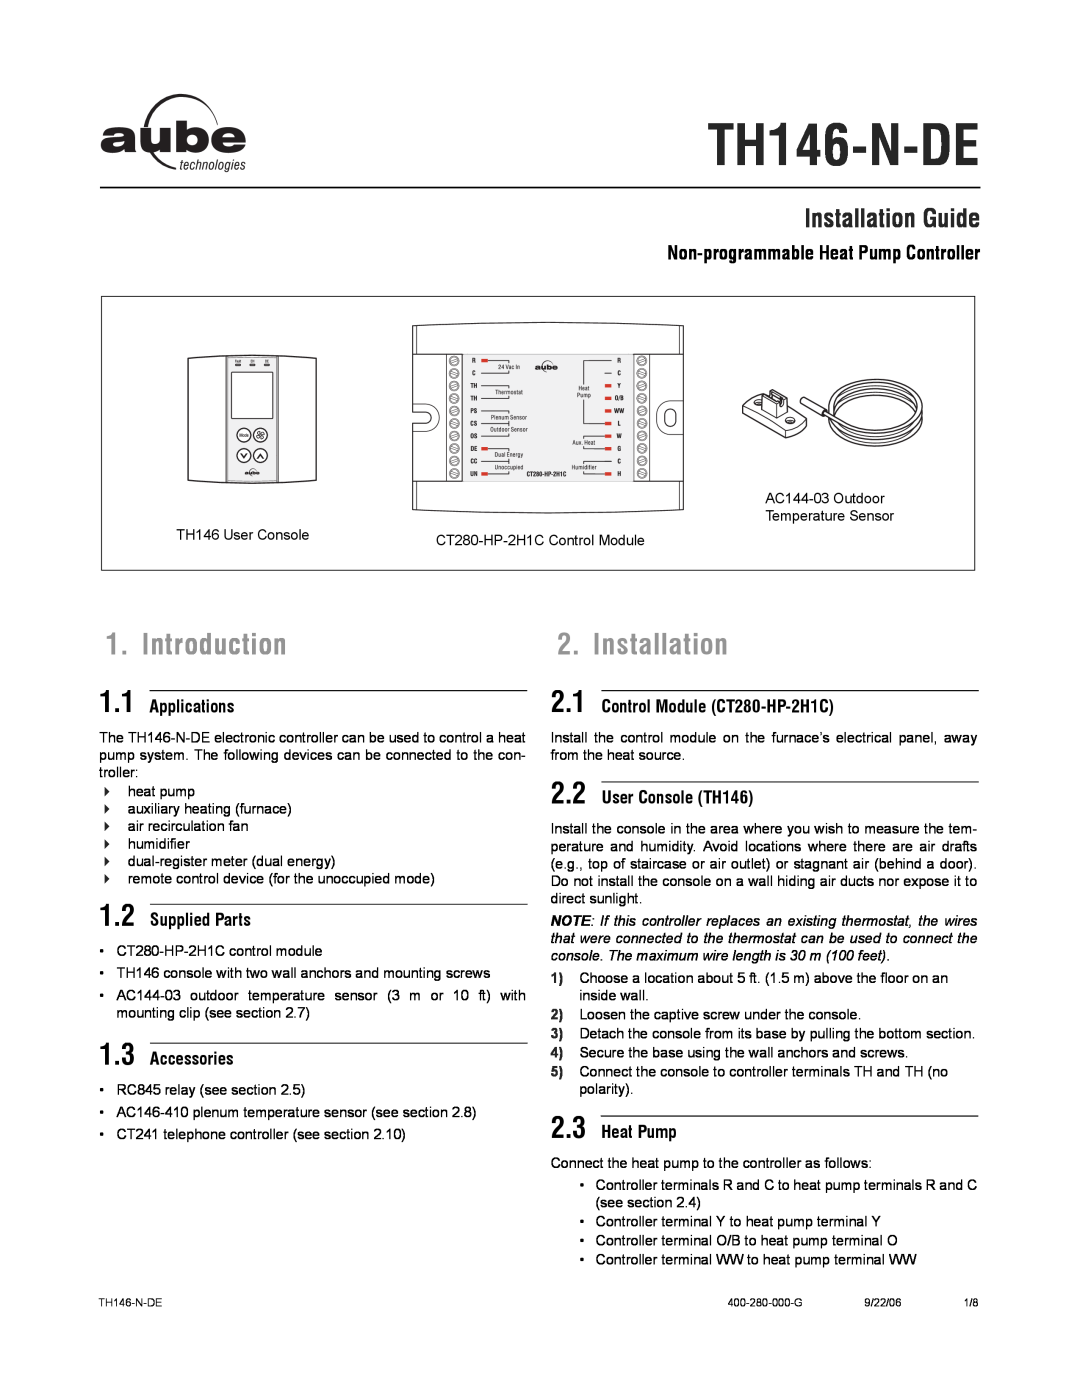 Aube Technologies TH146-N-DE manual Introduction, Installation Guide, Non-programmableHeat Pump Controller 